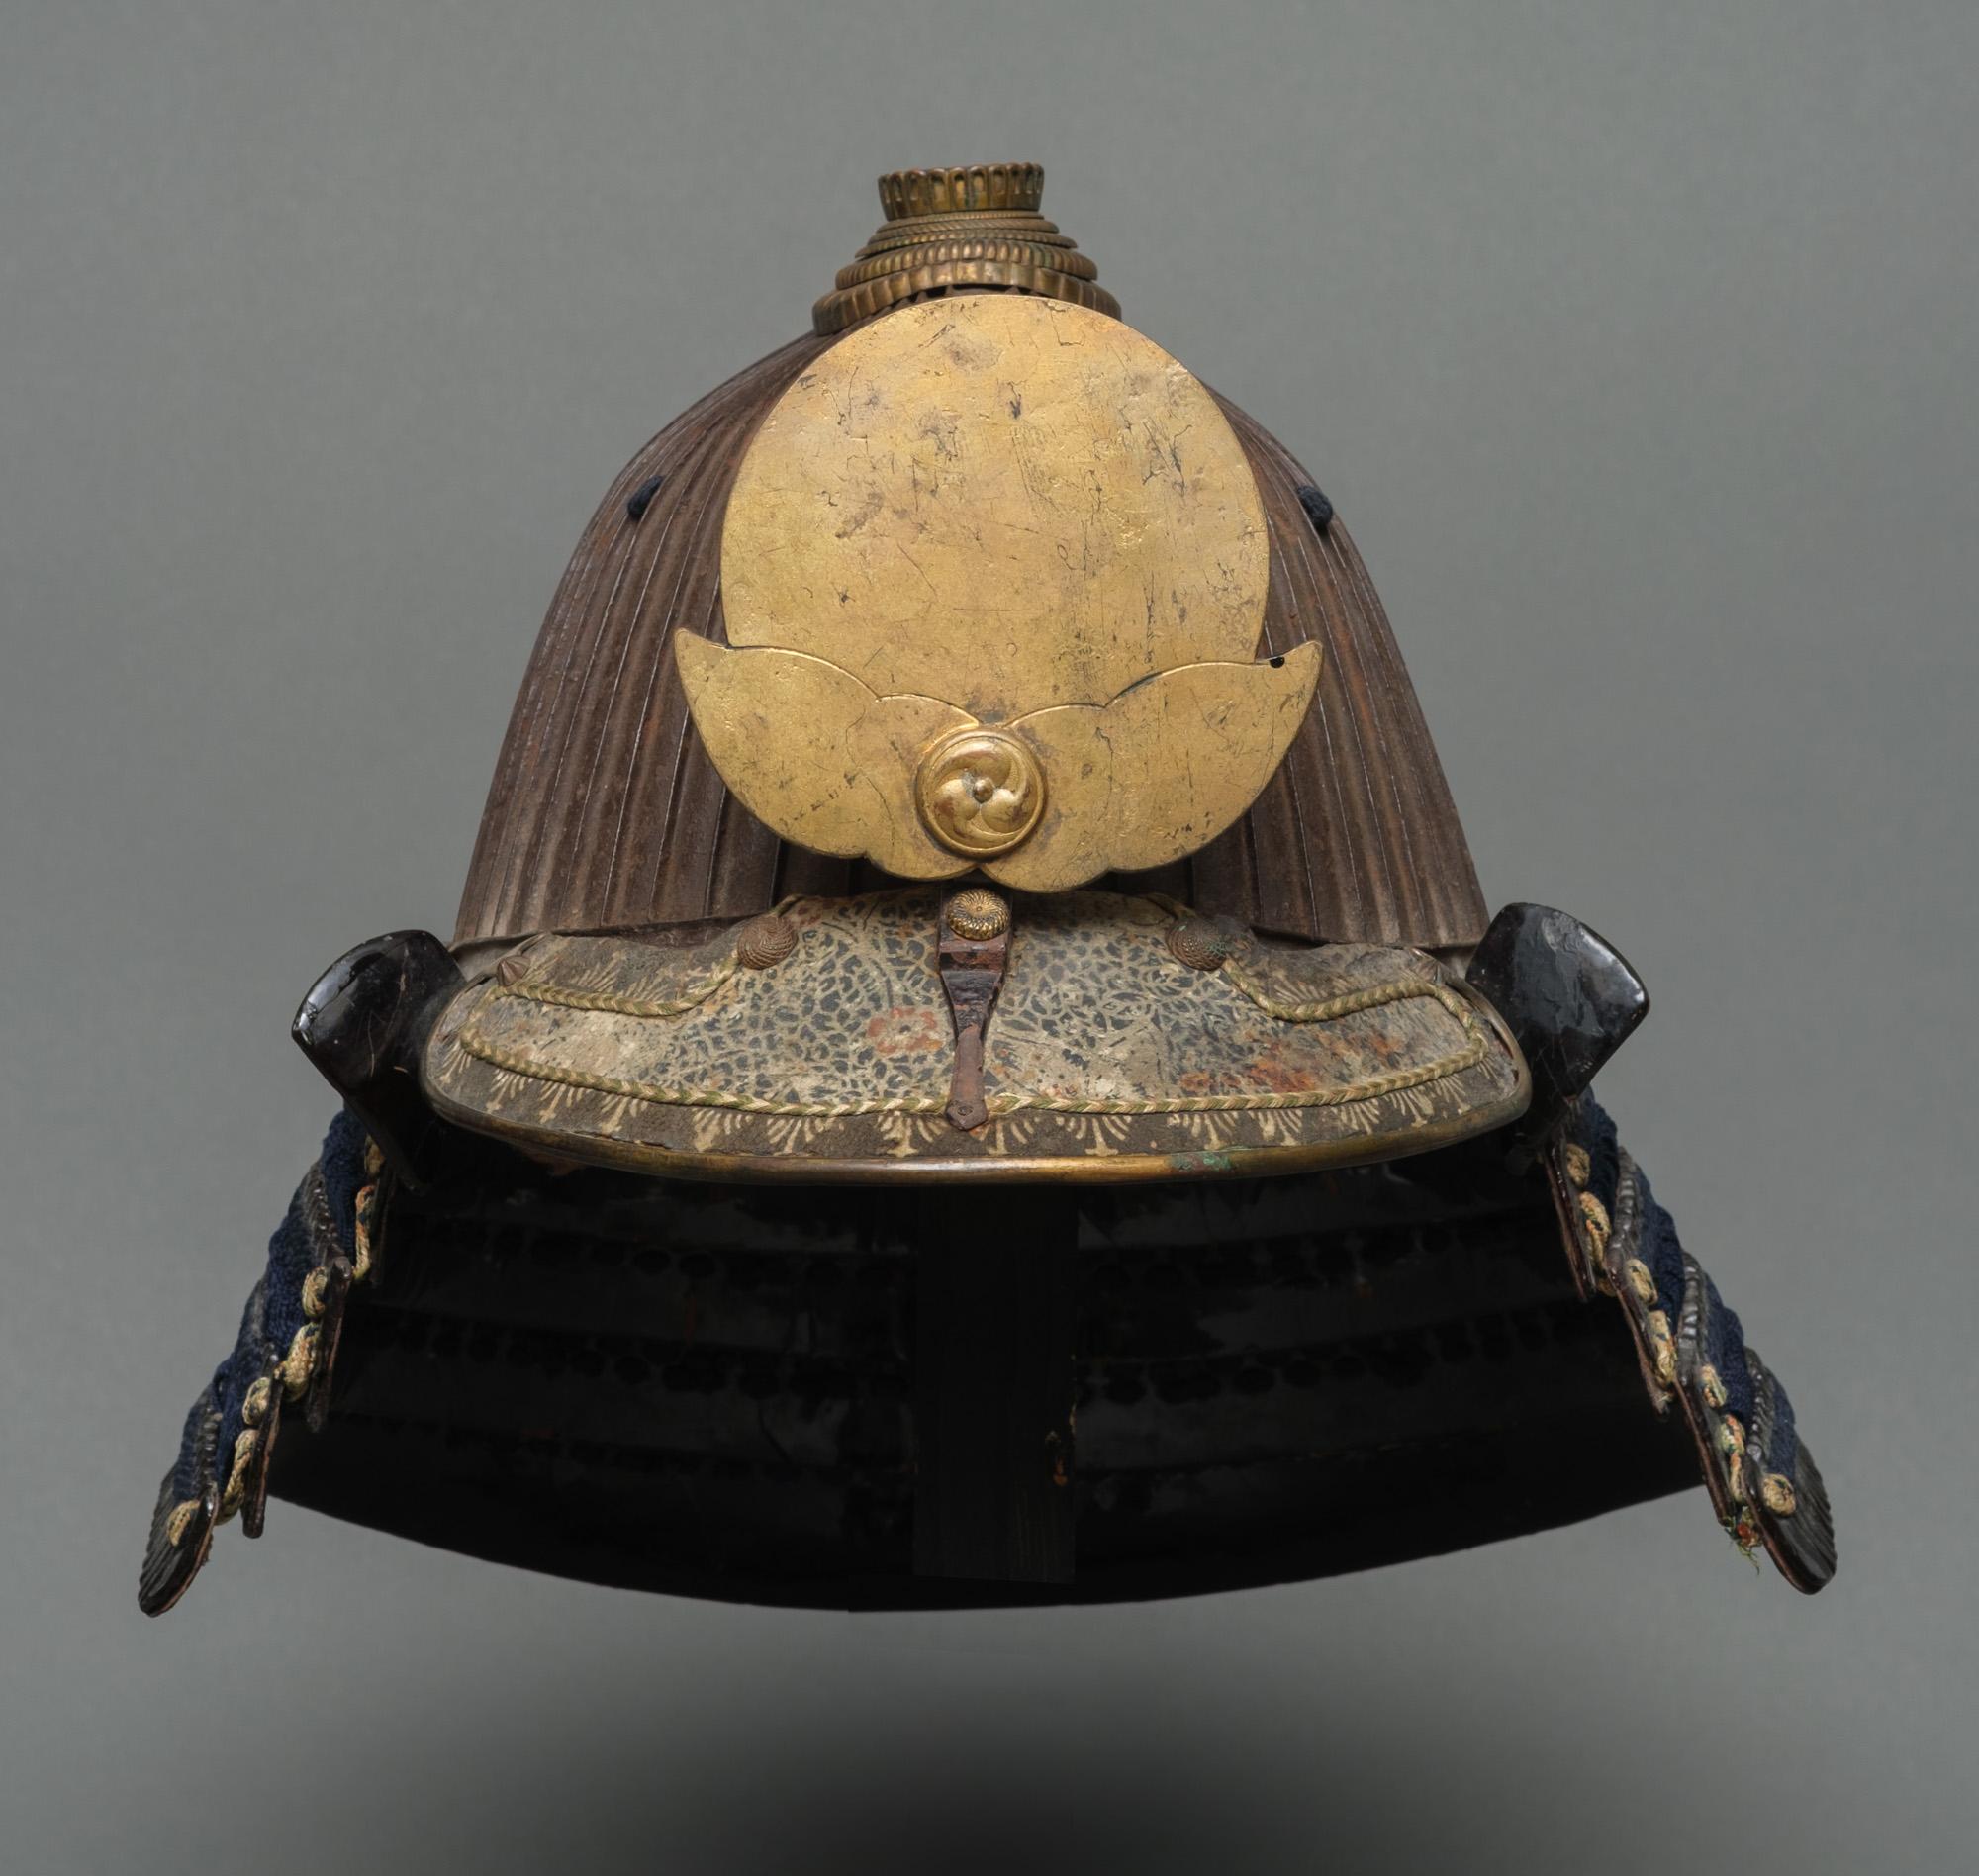 An antique, outstanding signed suji’bachi kabuto (helmet with ridges) surmounted by a gilt metal maedate (forecrest) shaped like a full moon emerging from the clouds heightened by a circular applique depicting three swirling commas